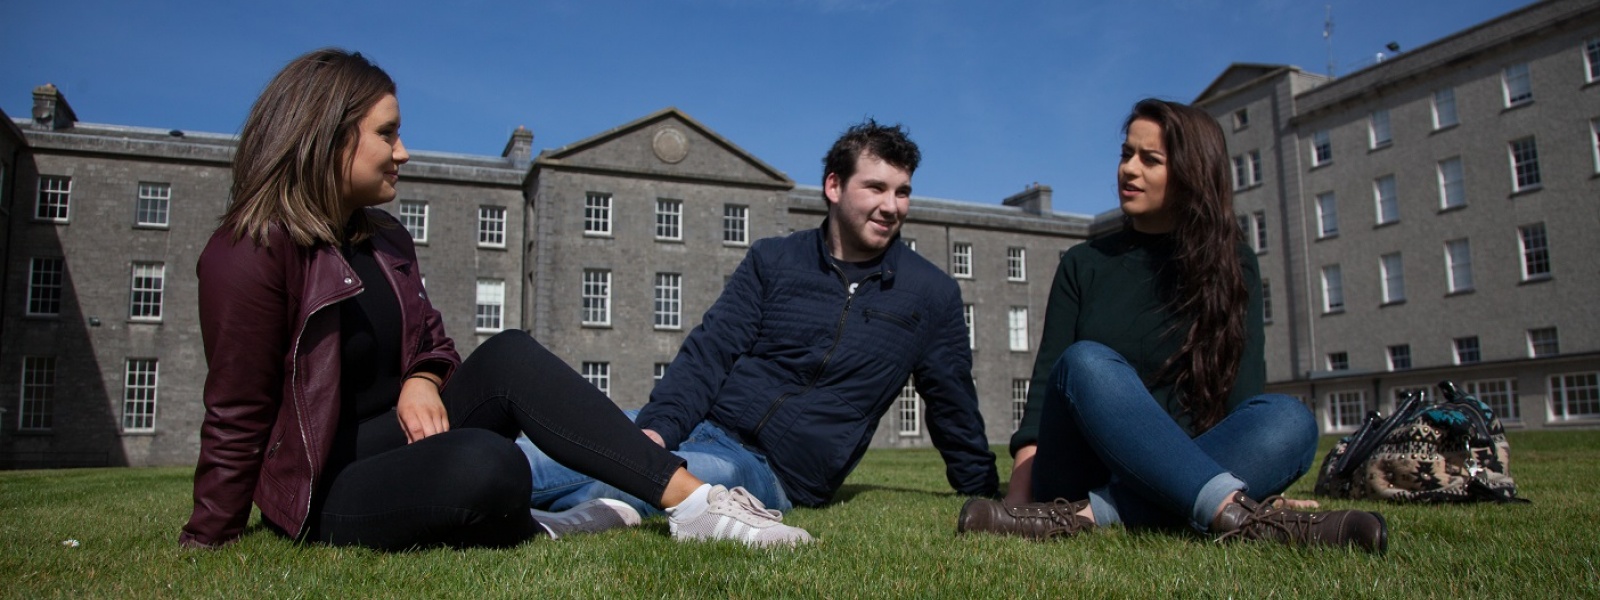 BA in Education, Business Studies and Accounting, MIC, St Patrick's Campus, Thurles